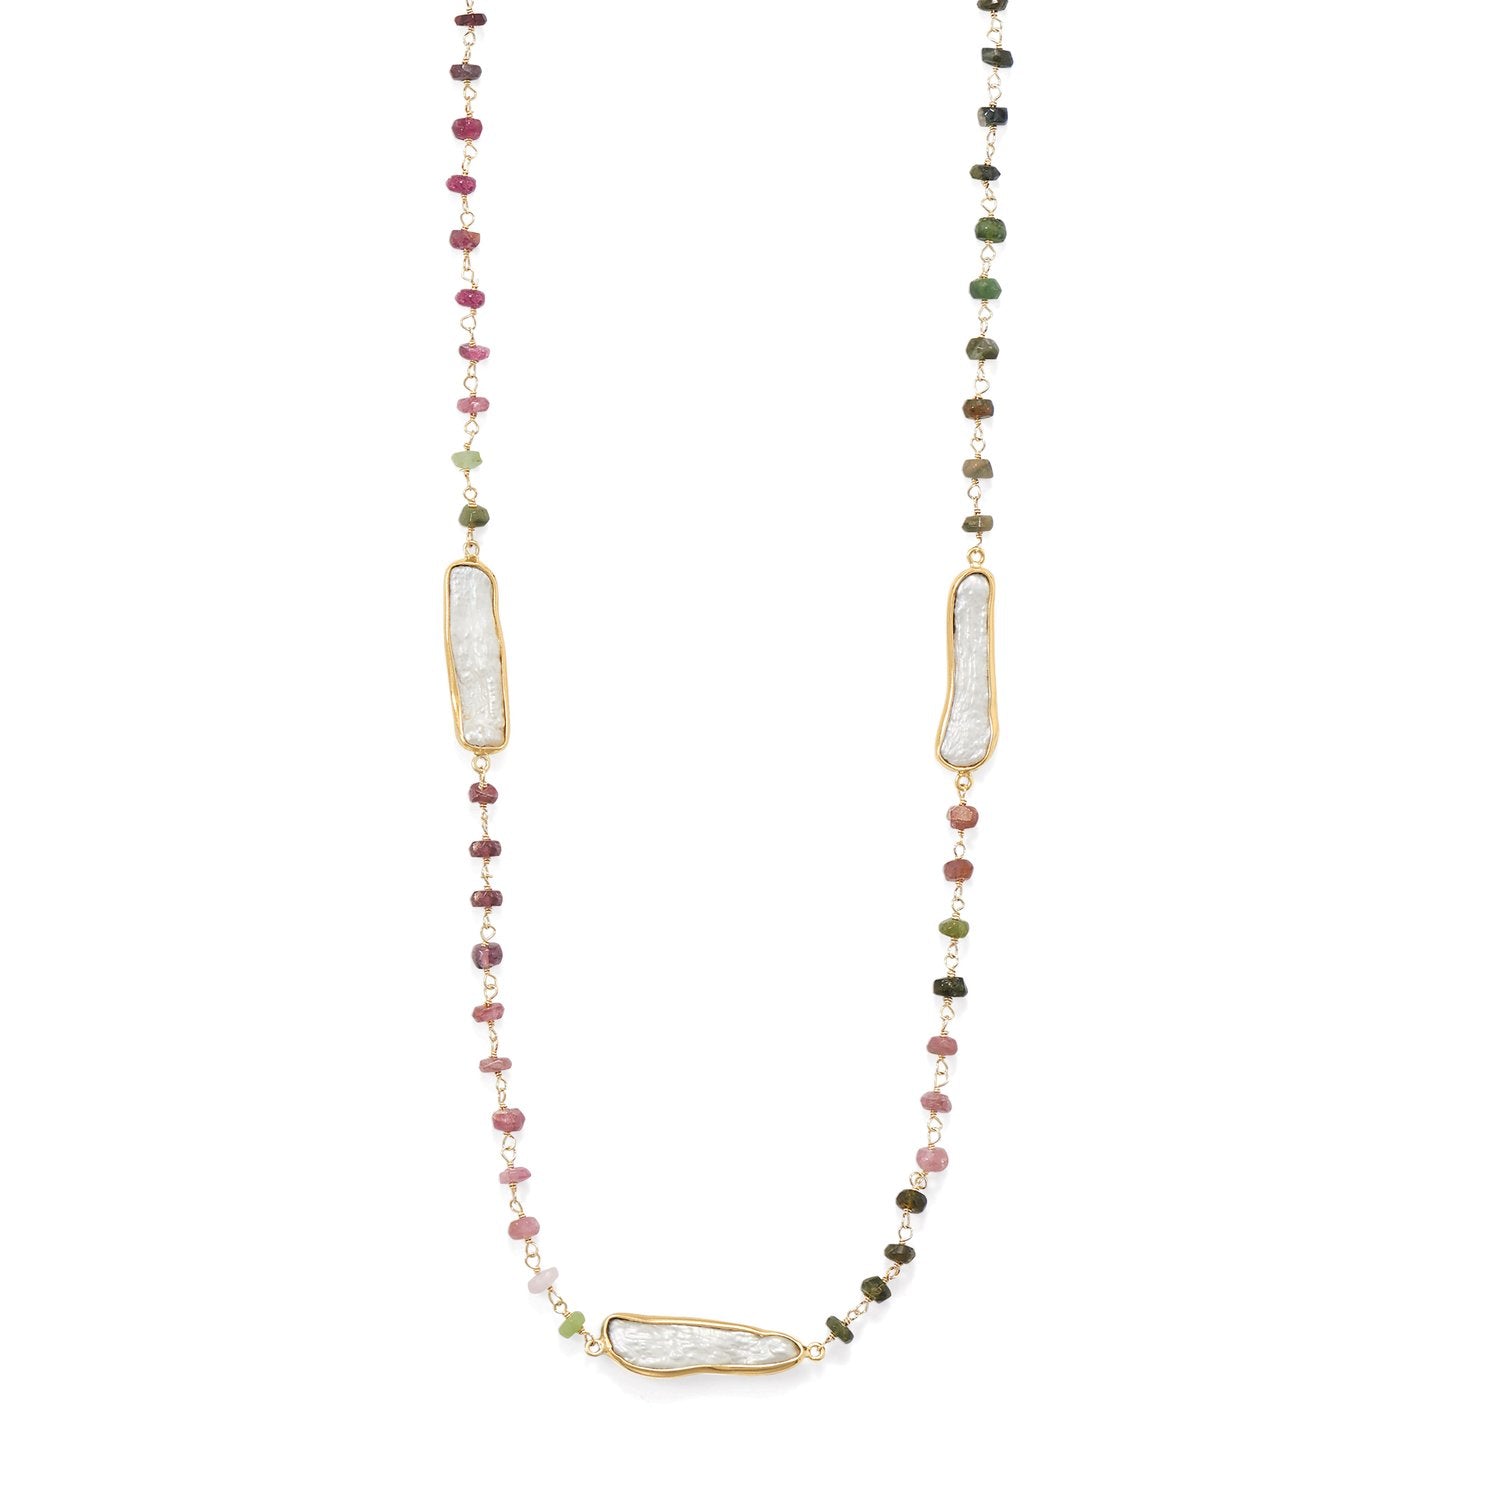 24" 14 Karat Gold Plated Tourmaline and Cultured Freshwater Pearl Necklace - Joyeria Lady